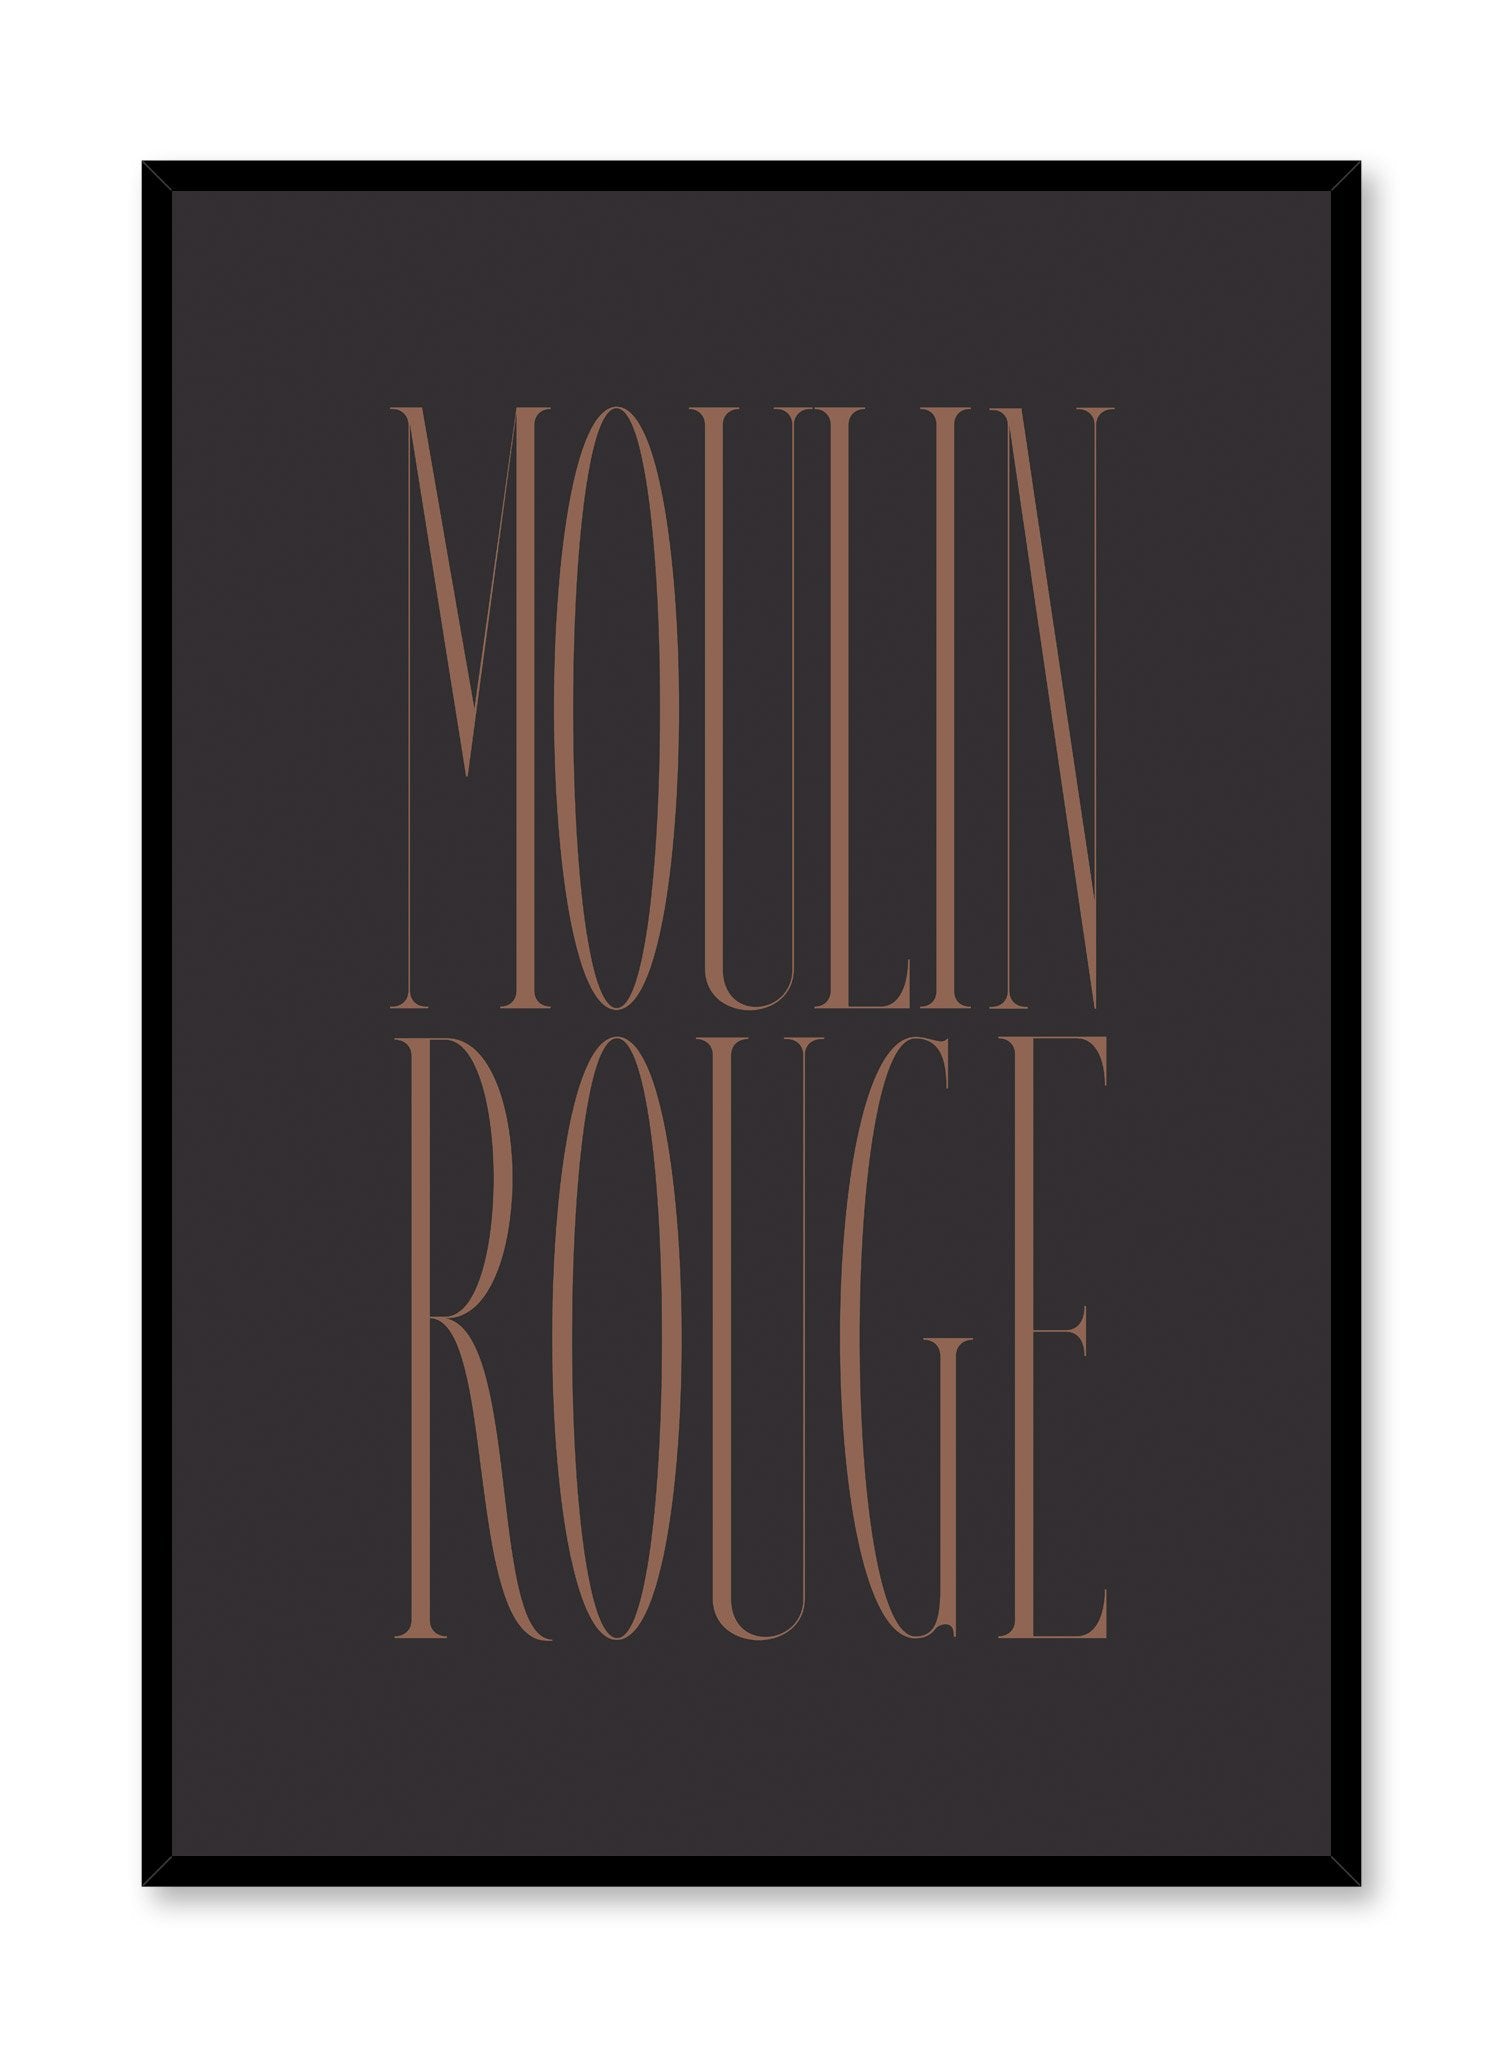 "Moulin Rouge" is a minimalist typography poster by Opposite Wall of the word Moulin Rouge in burnt-orange vintage lettering over a black background.